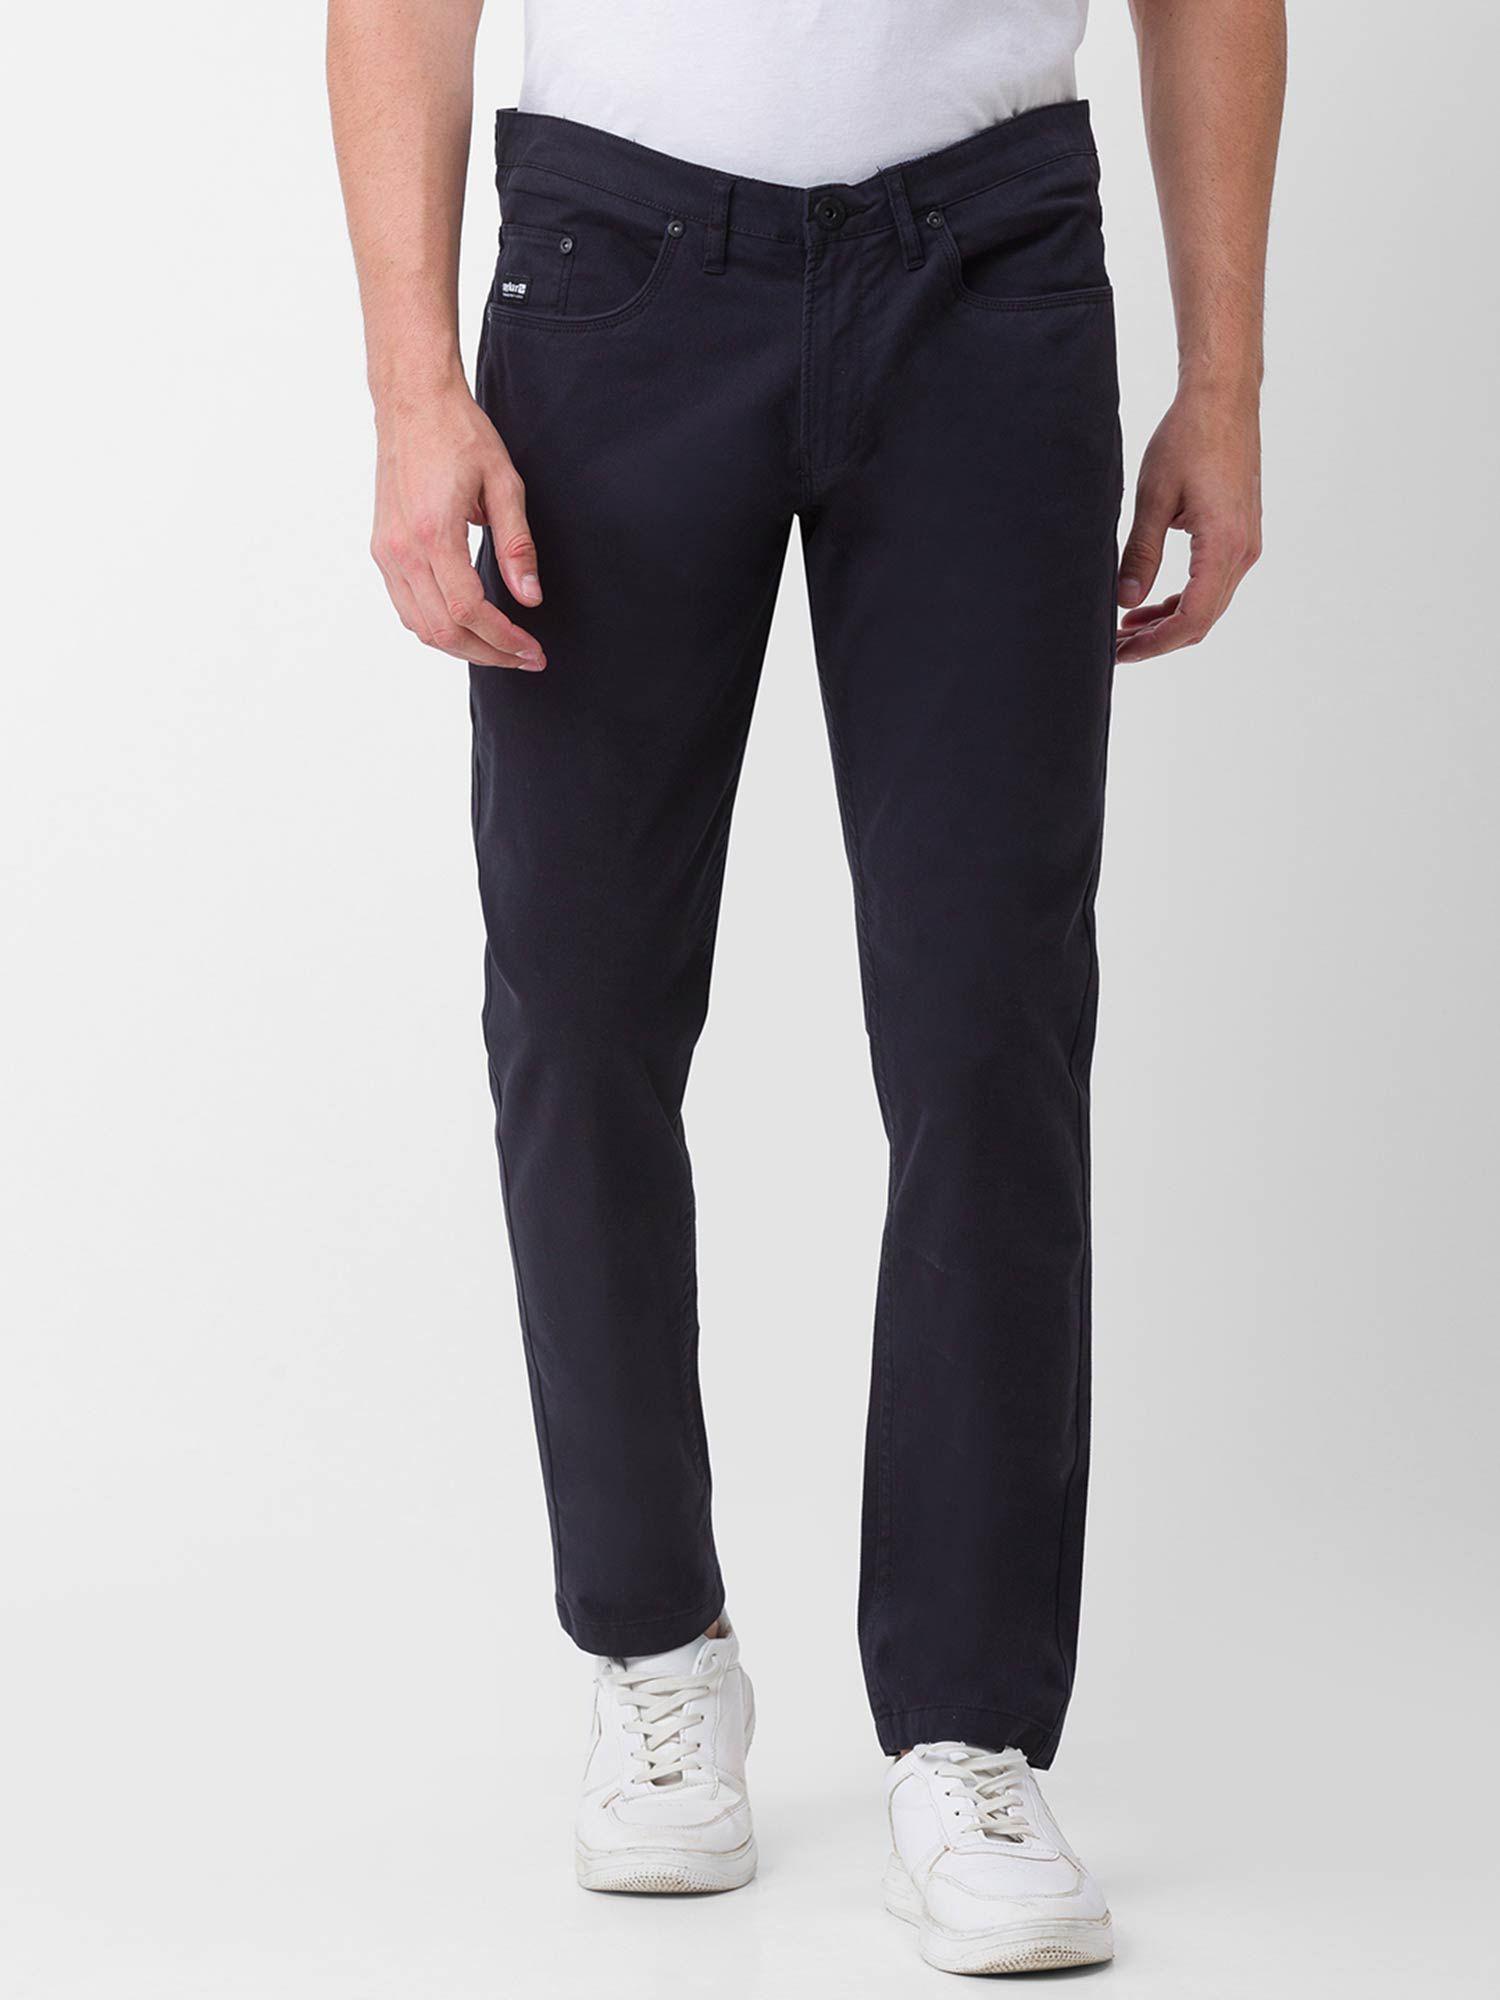 black-cotton-slim-fit-tapered-length-trousers-for-men